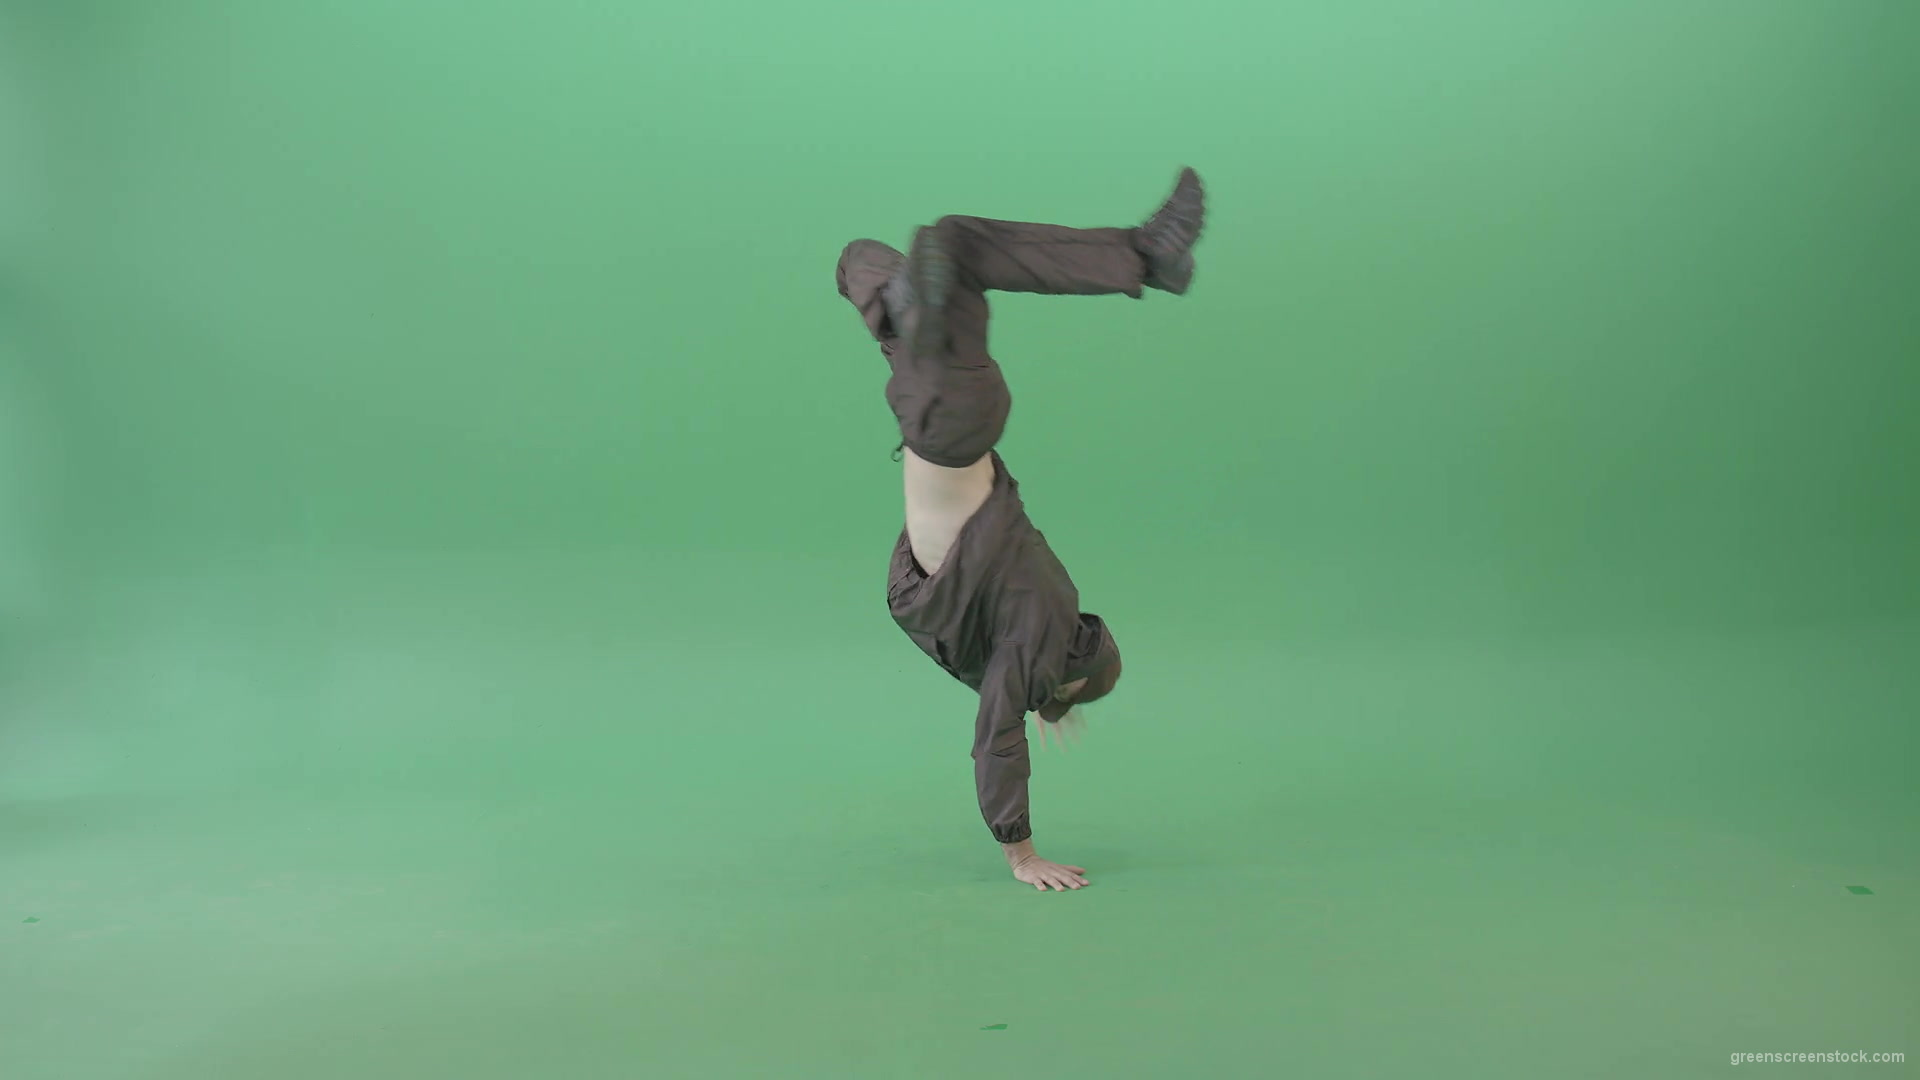 B-Boy-making-gymnastic-break-dance-for-advertising-isolated-on-green-screen-4K-Video-Footage-1920_009 Green Screen Stock